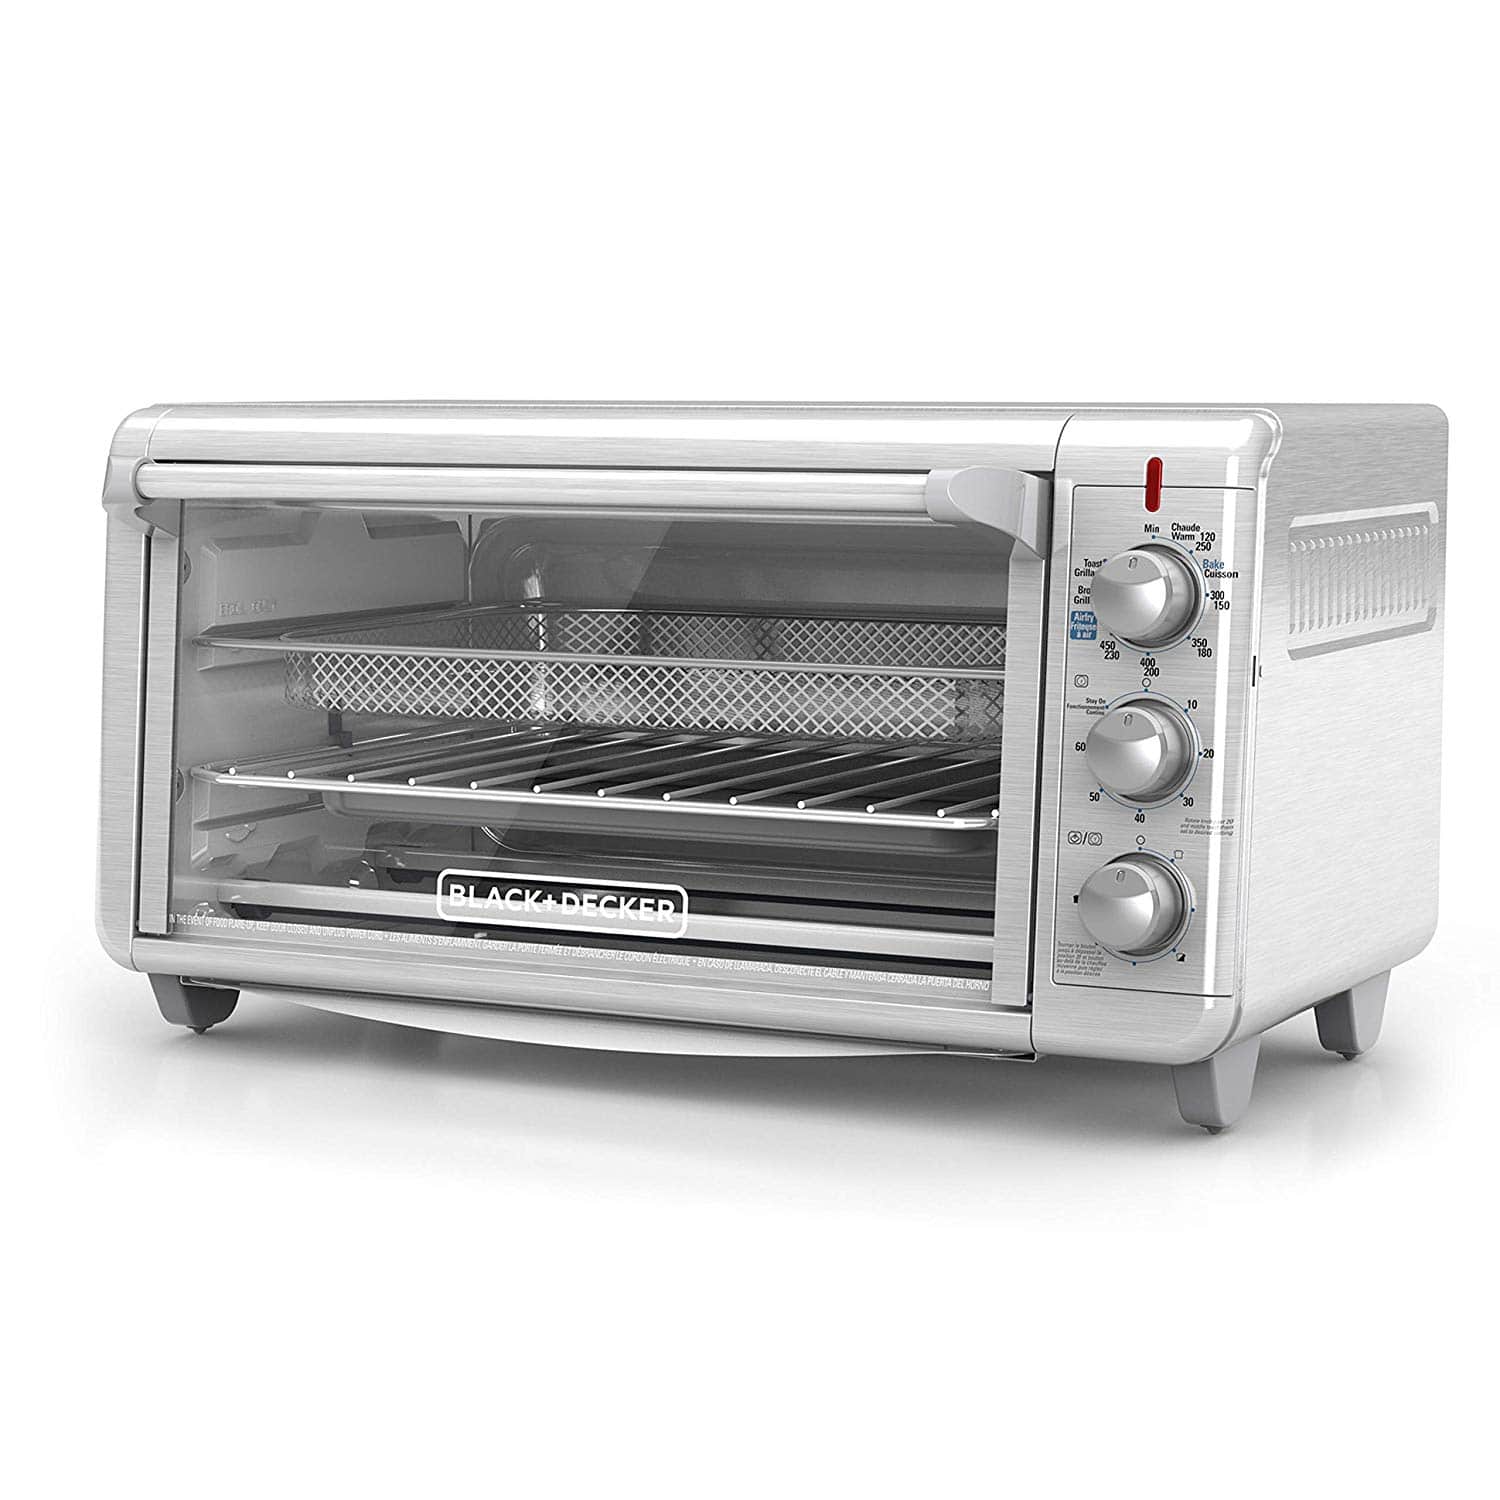 The Takeaway on the Farberware environment Fryer and Toaster range